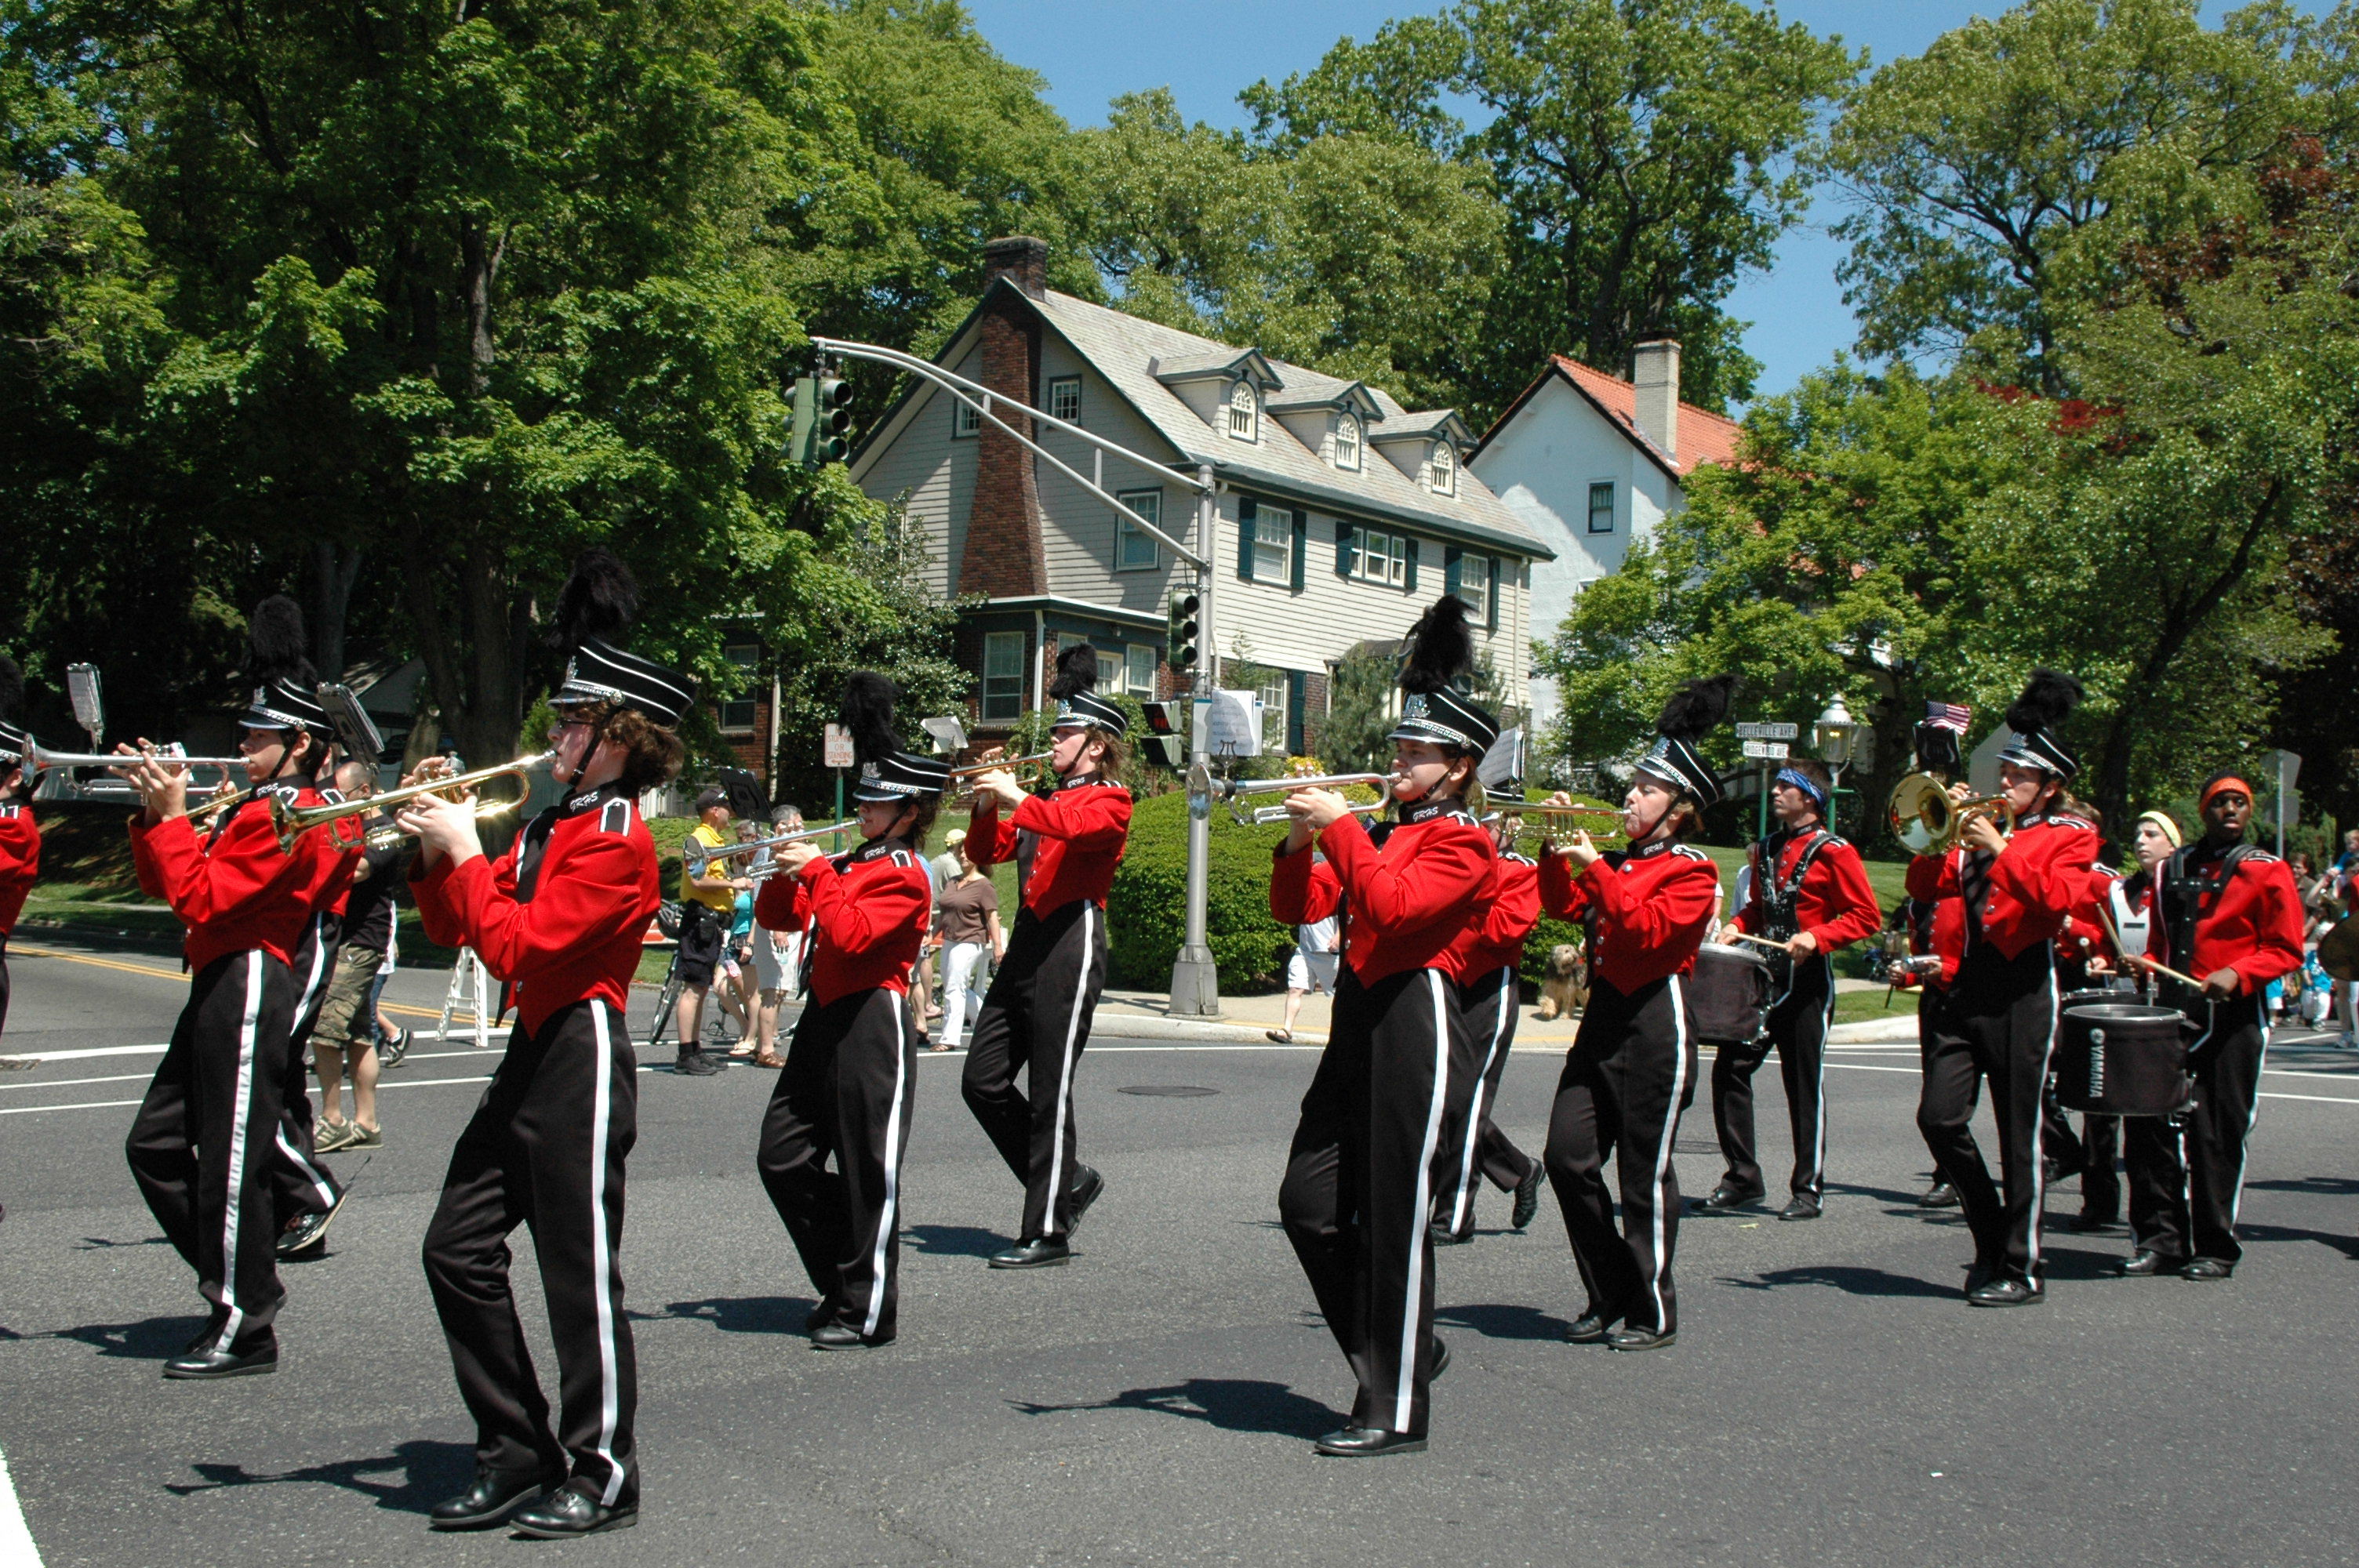 Band marching and playing